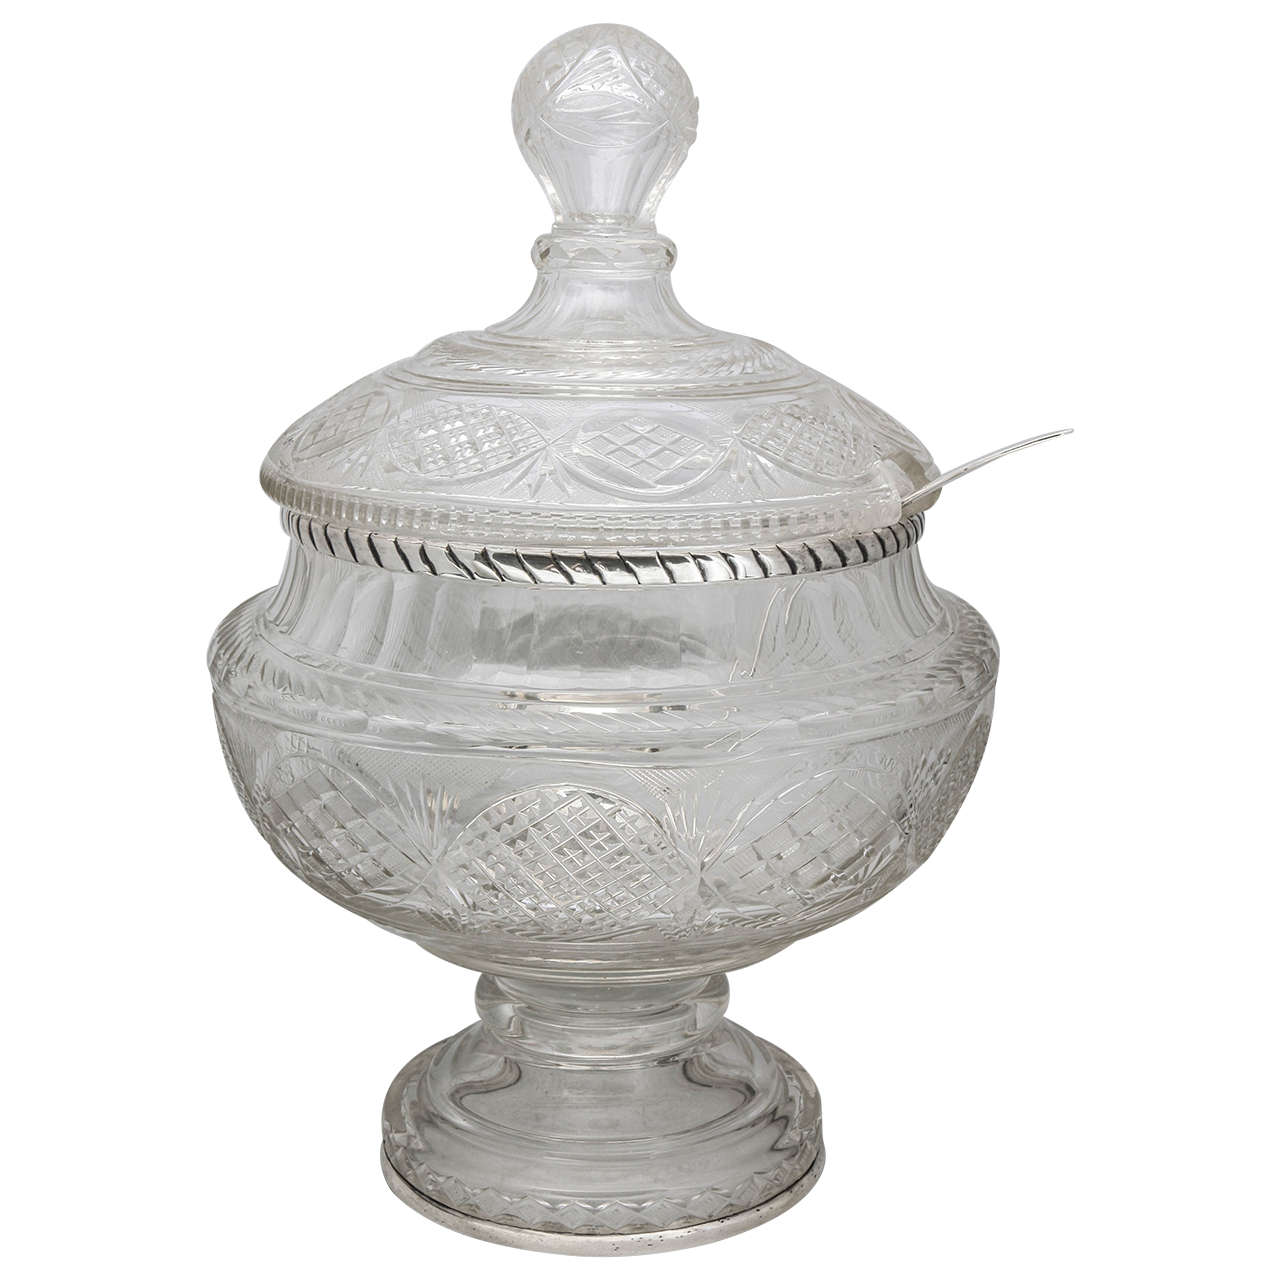 19th Century Continental '.800' Silver-Mounted Pedestal Based Punch Bowl For Sale